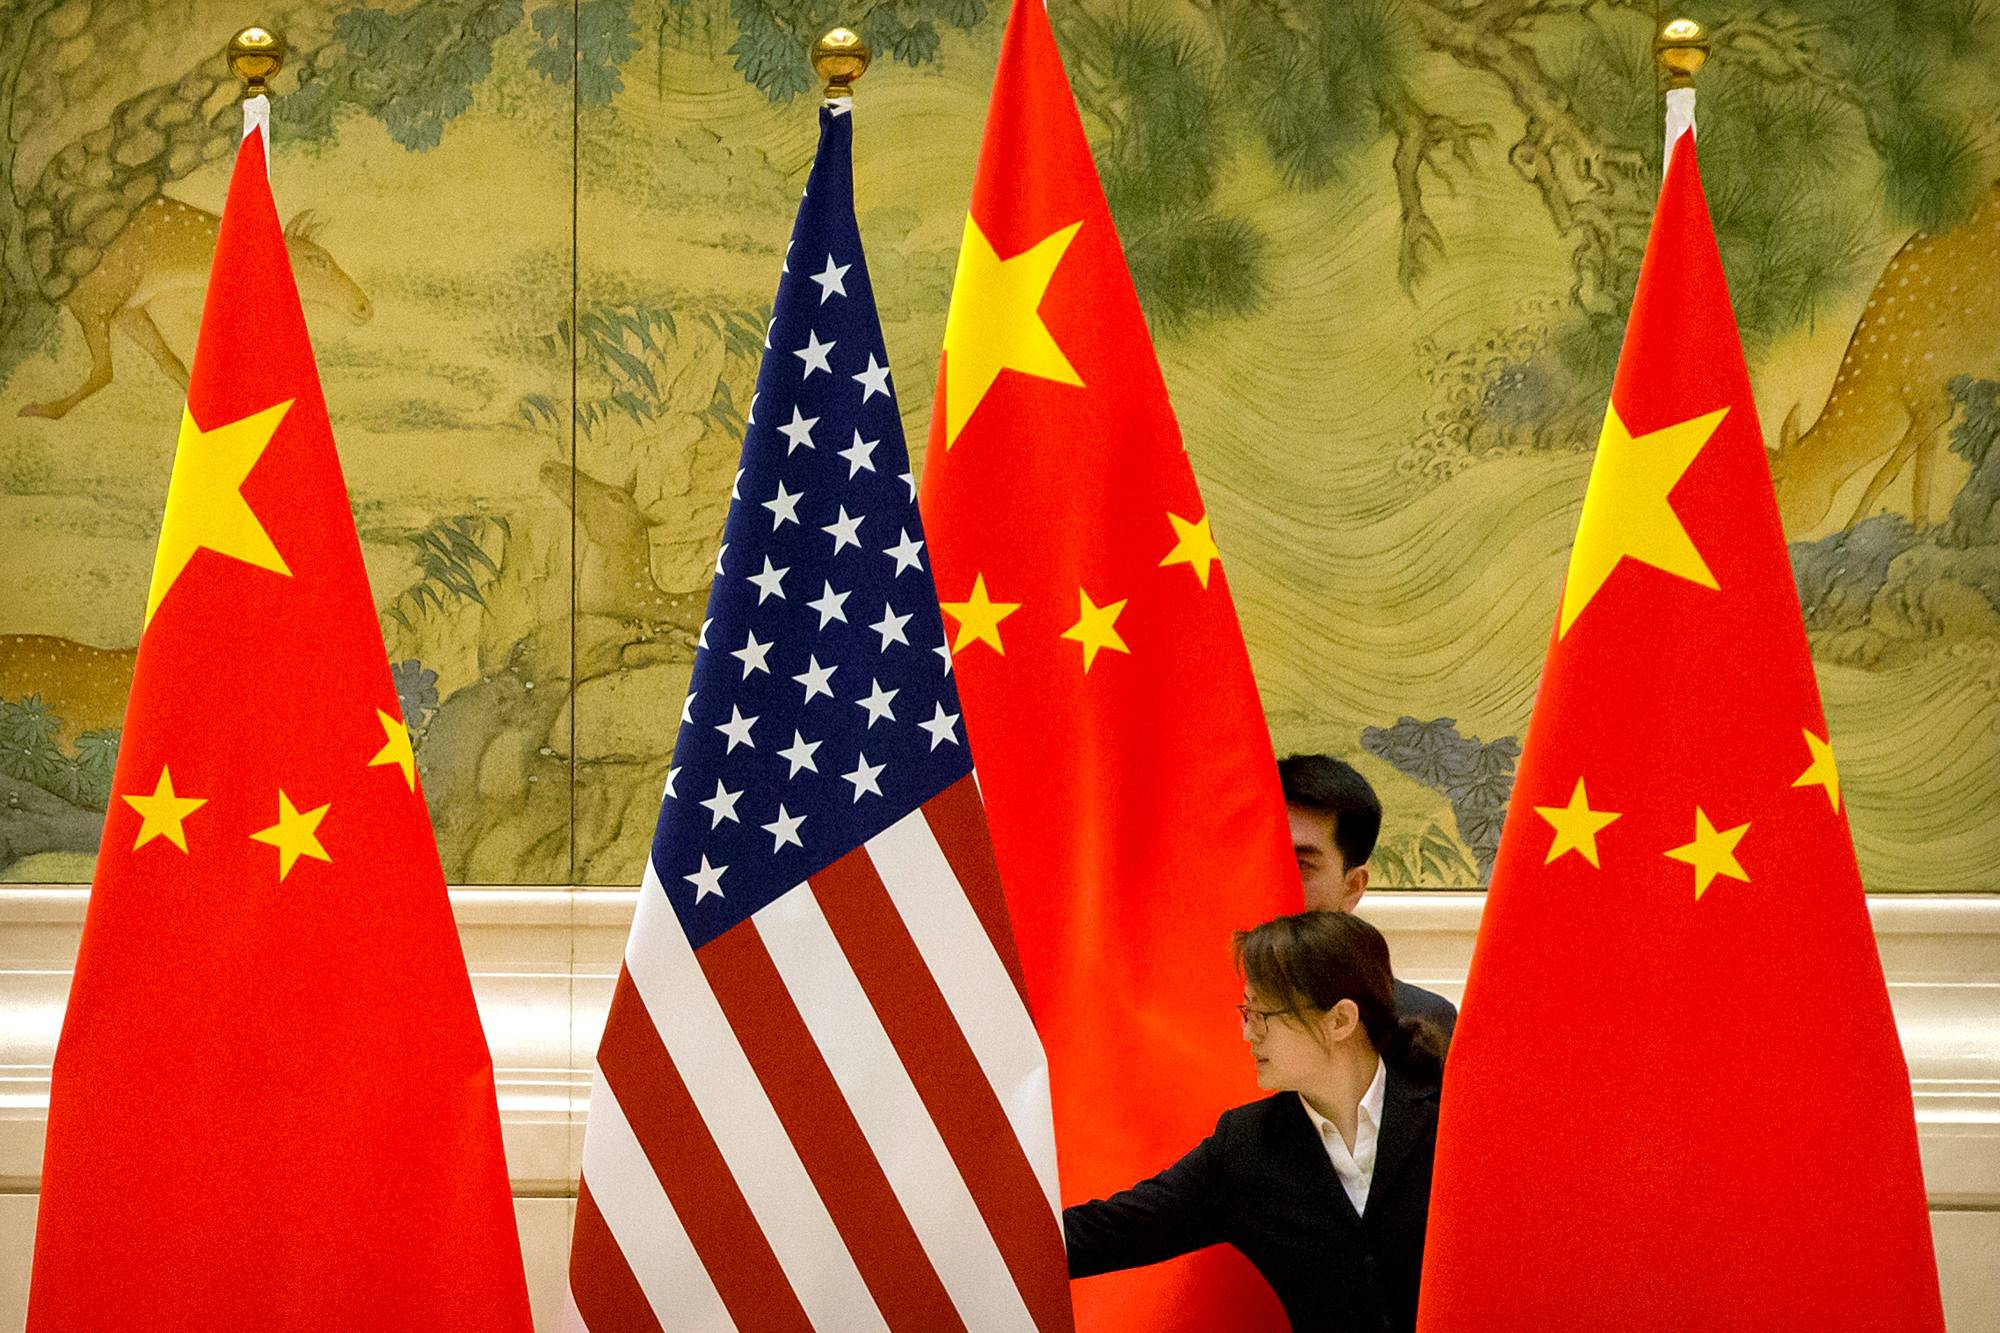 Chinese staffers adjust U.S. and Chinese flags before the opening session of Sino-U.S. trade negotiations in Beijing in February 2019. | POOL / VIA REUTERS